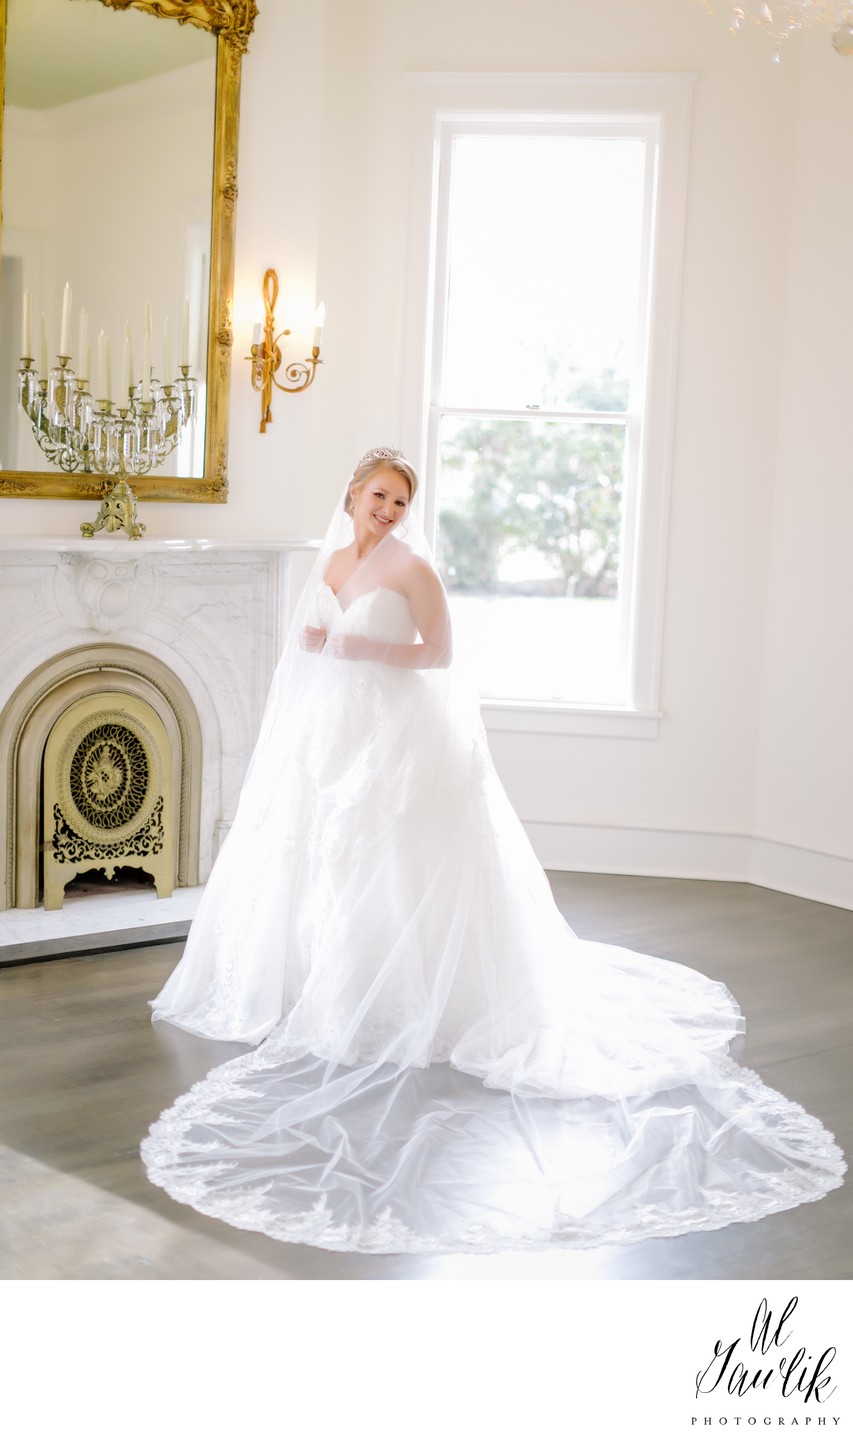 Bride posing by a fireplace